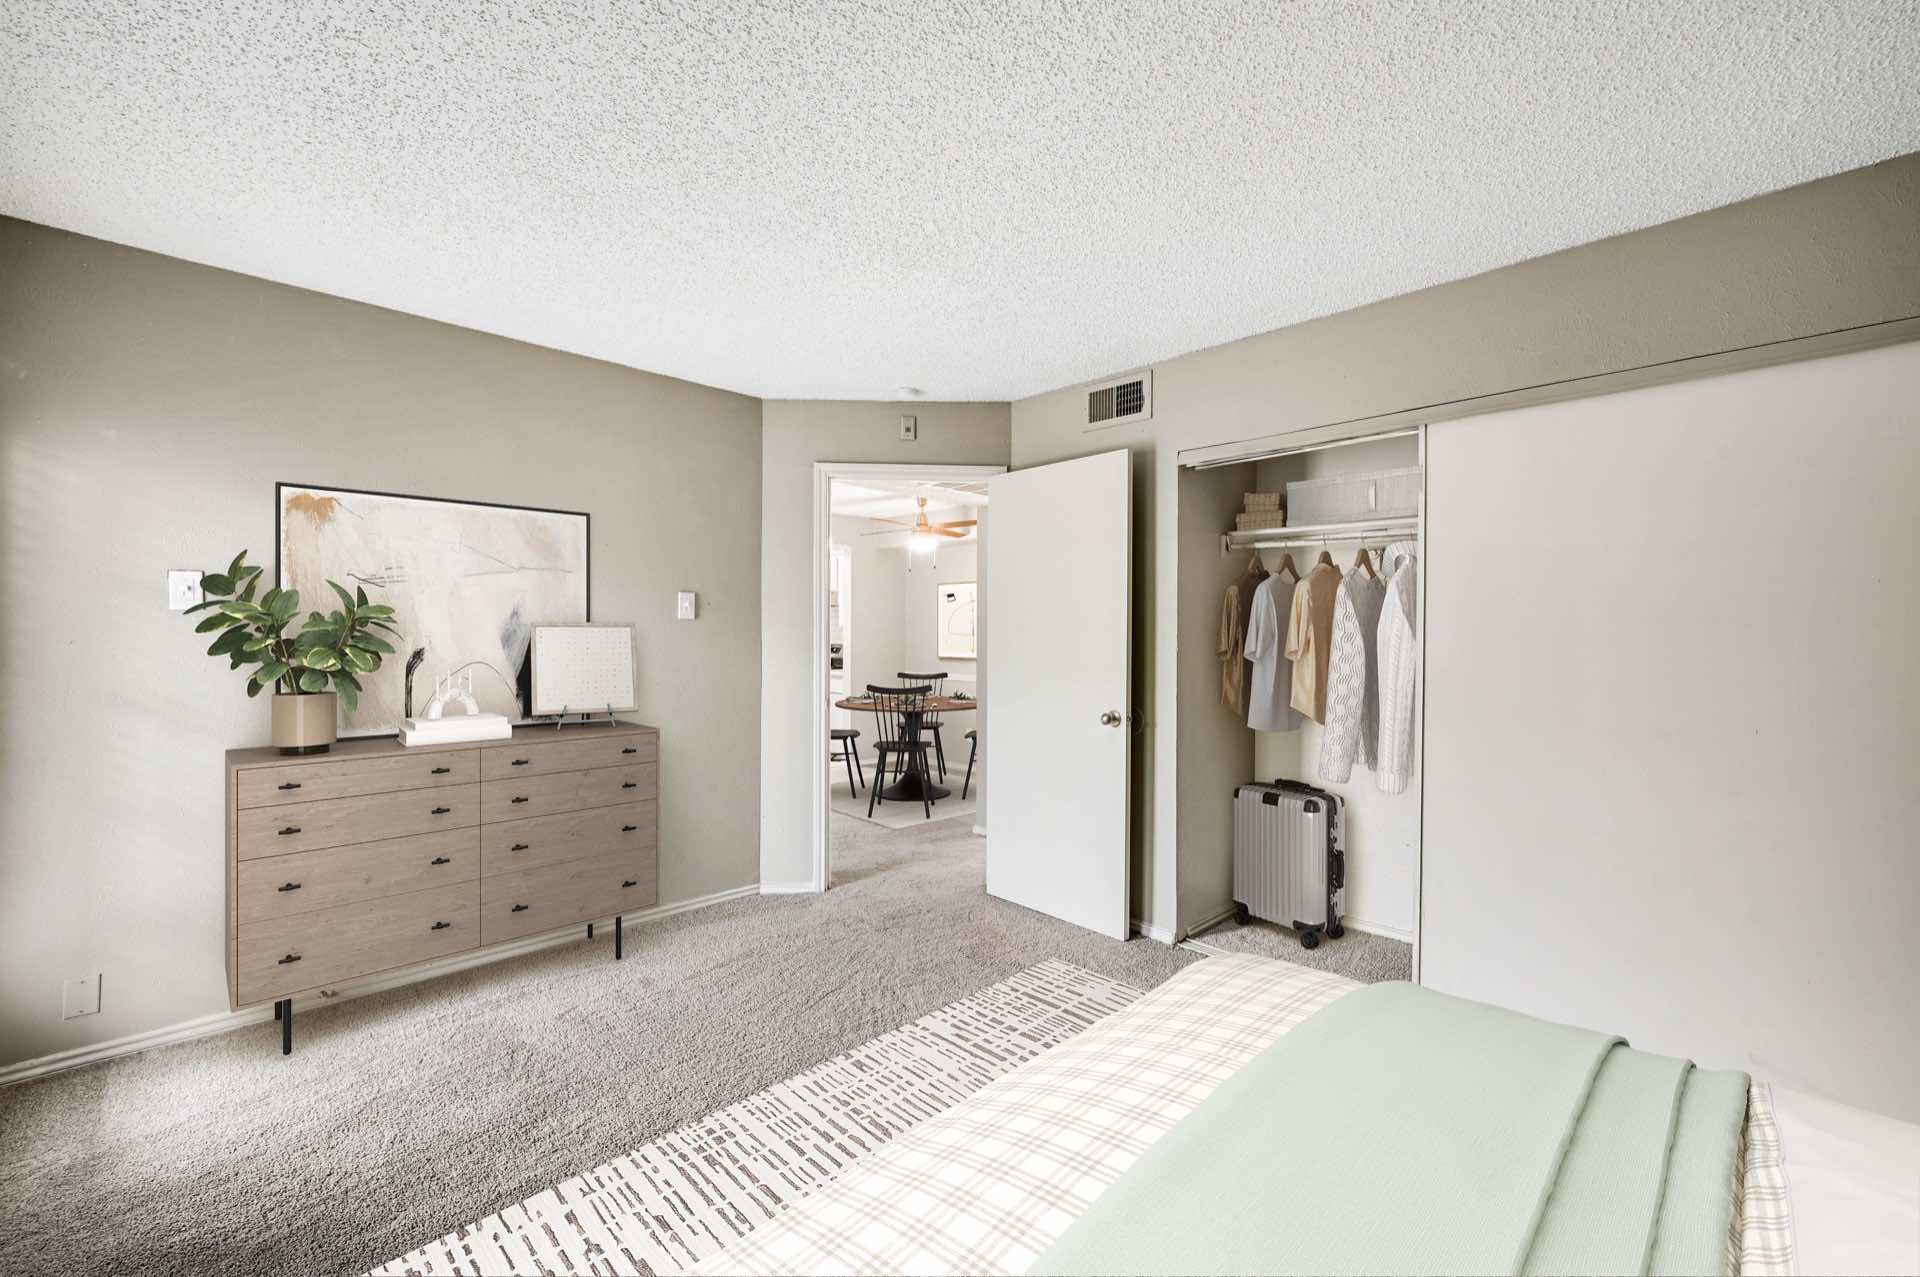 Carpeted bedroom with reach-in closet